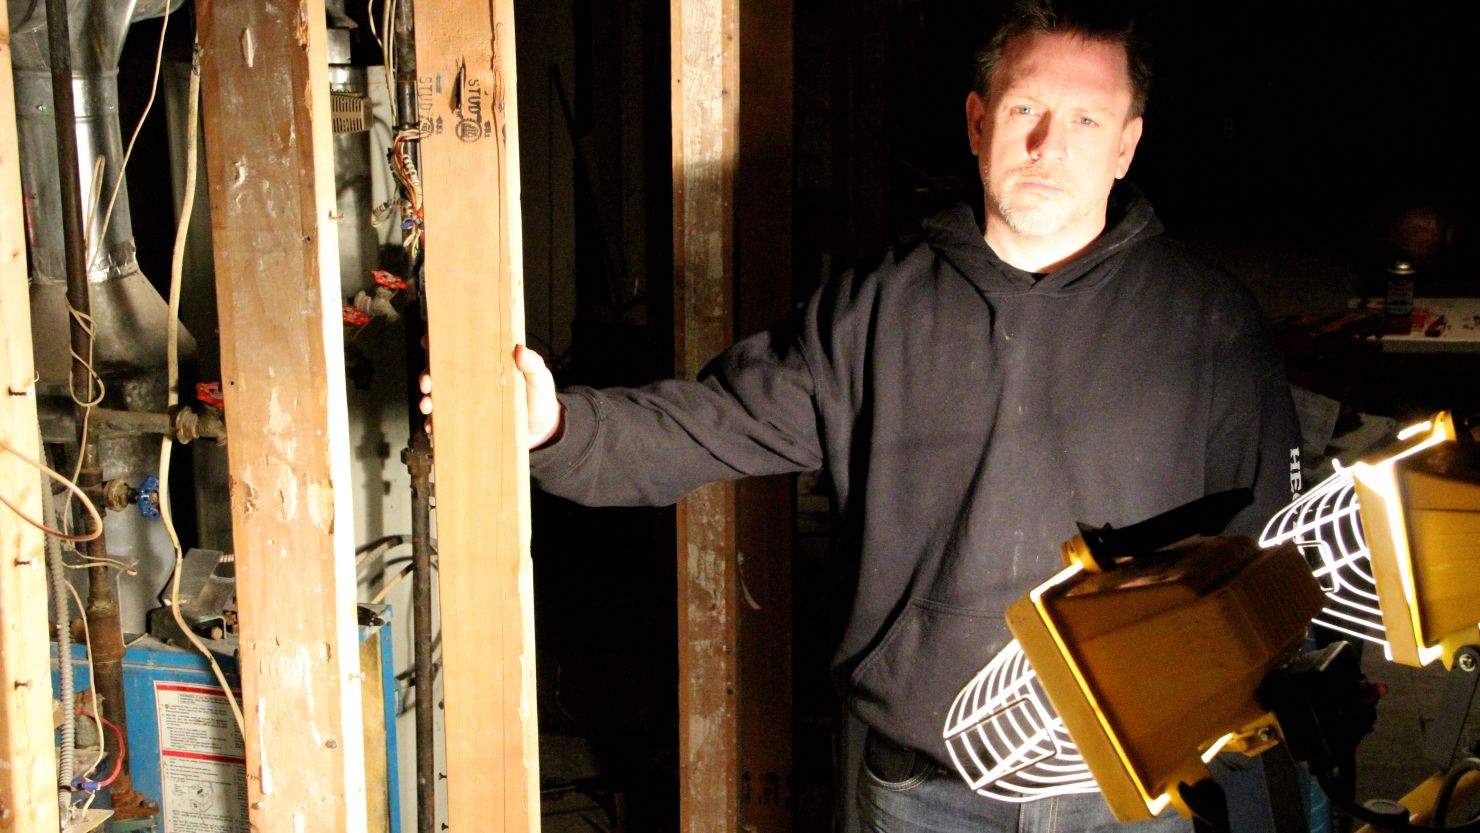 Jersey City resident Jeff Spangler works by floodlight in his basement, which was destroyed by Superstorm Sandy.